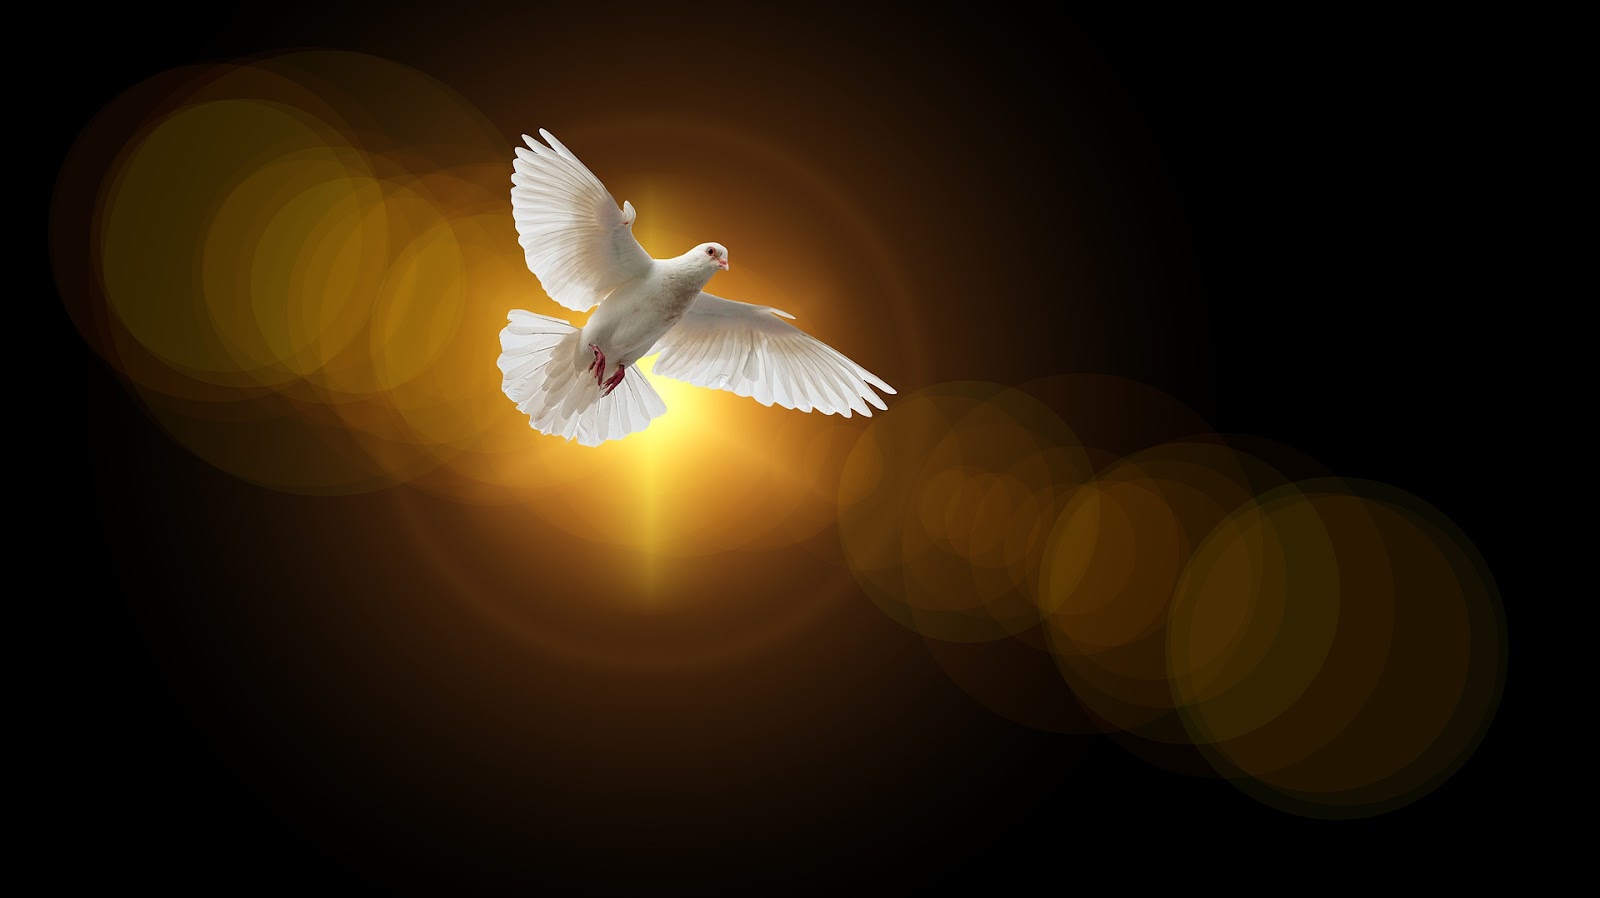 A dove representing the holy spirit, a part of the holy trinity